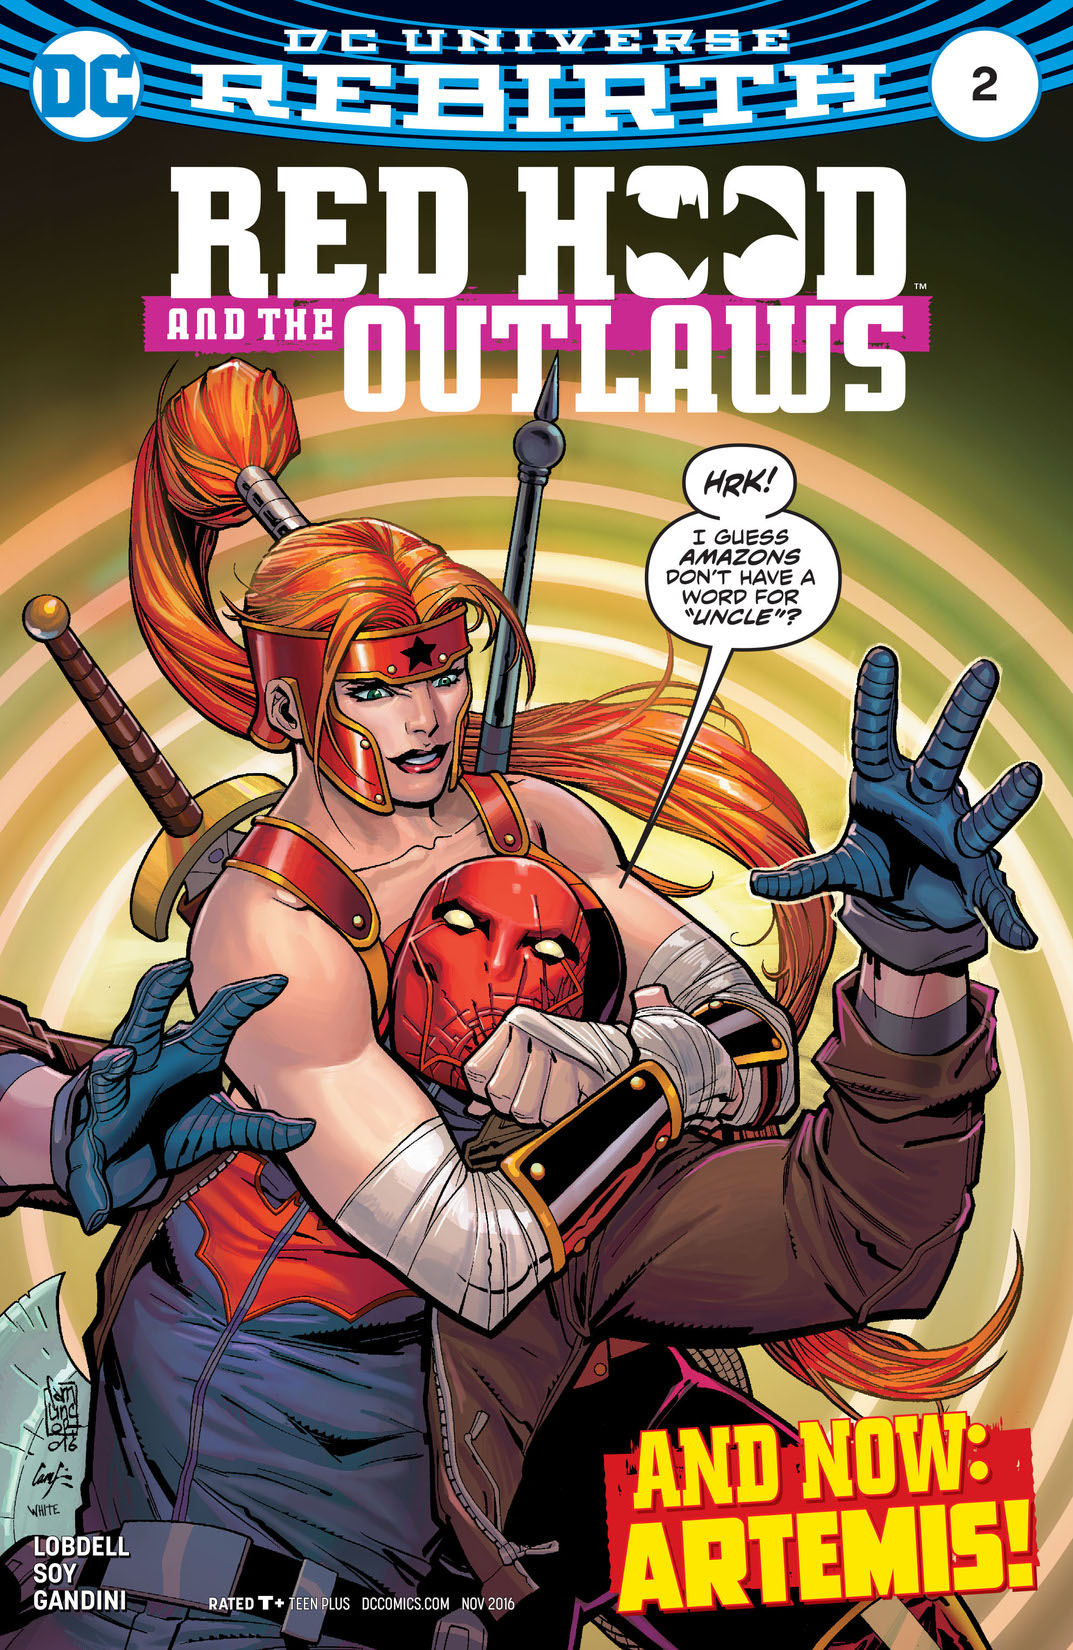 Red Hood and the Outlaws (2016-) #2 preview images